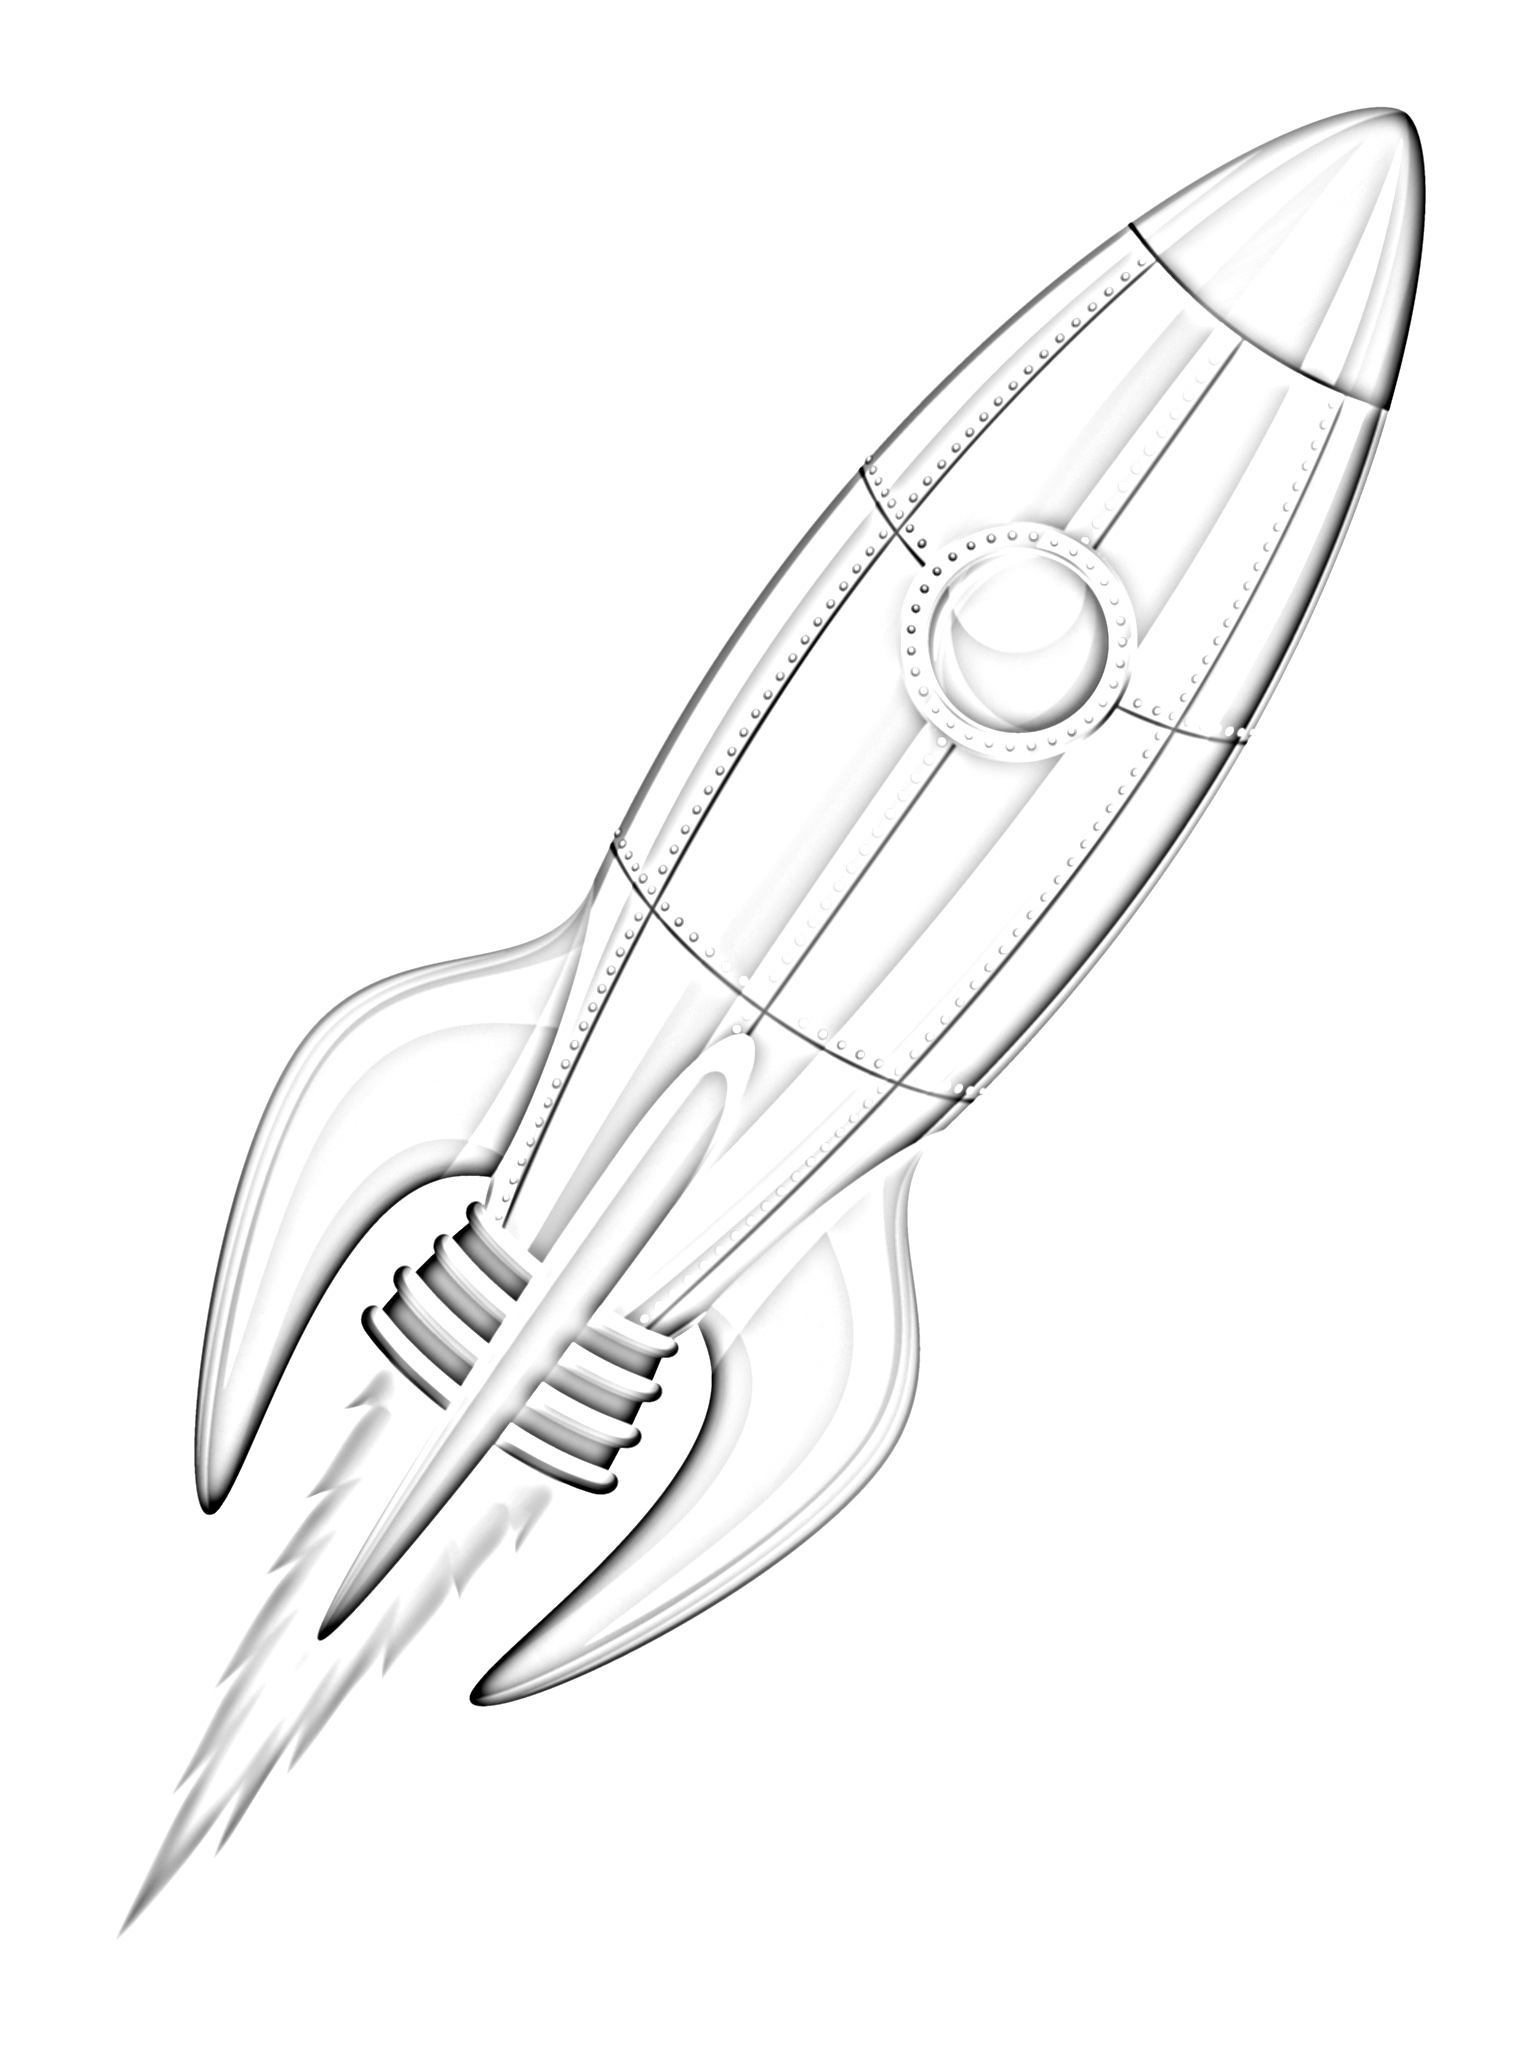 Rocket ship in space coloring page